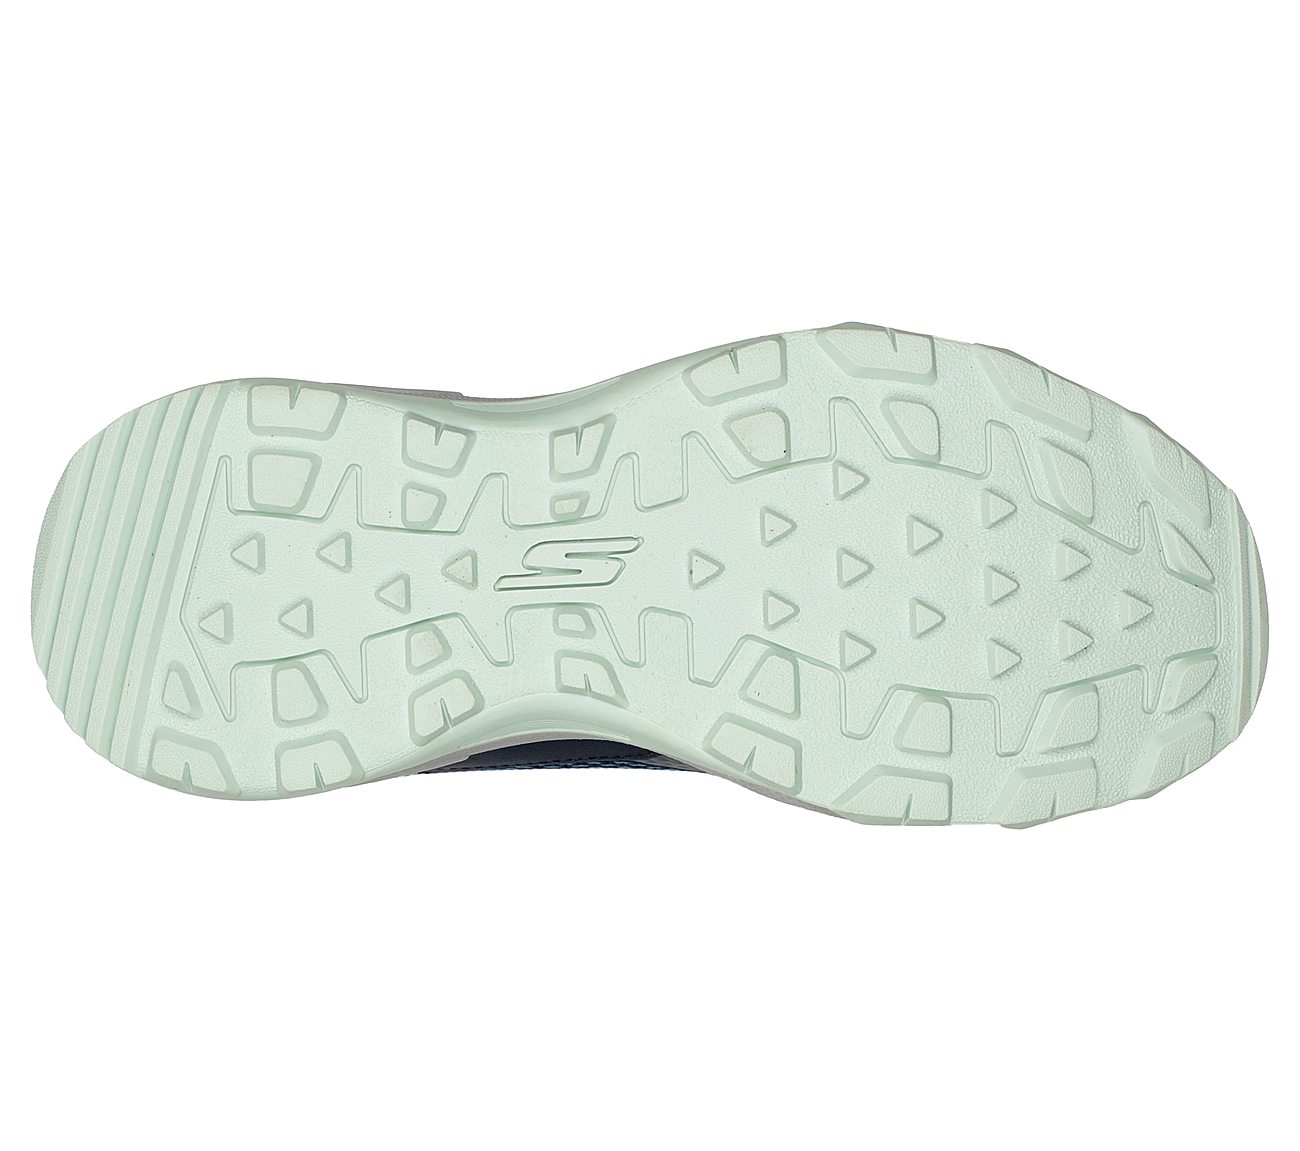 GO RUN TRAIL ALTITUDE, NAVY/TURQUOISE Footwear Bottom View